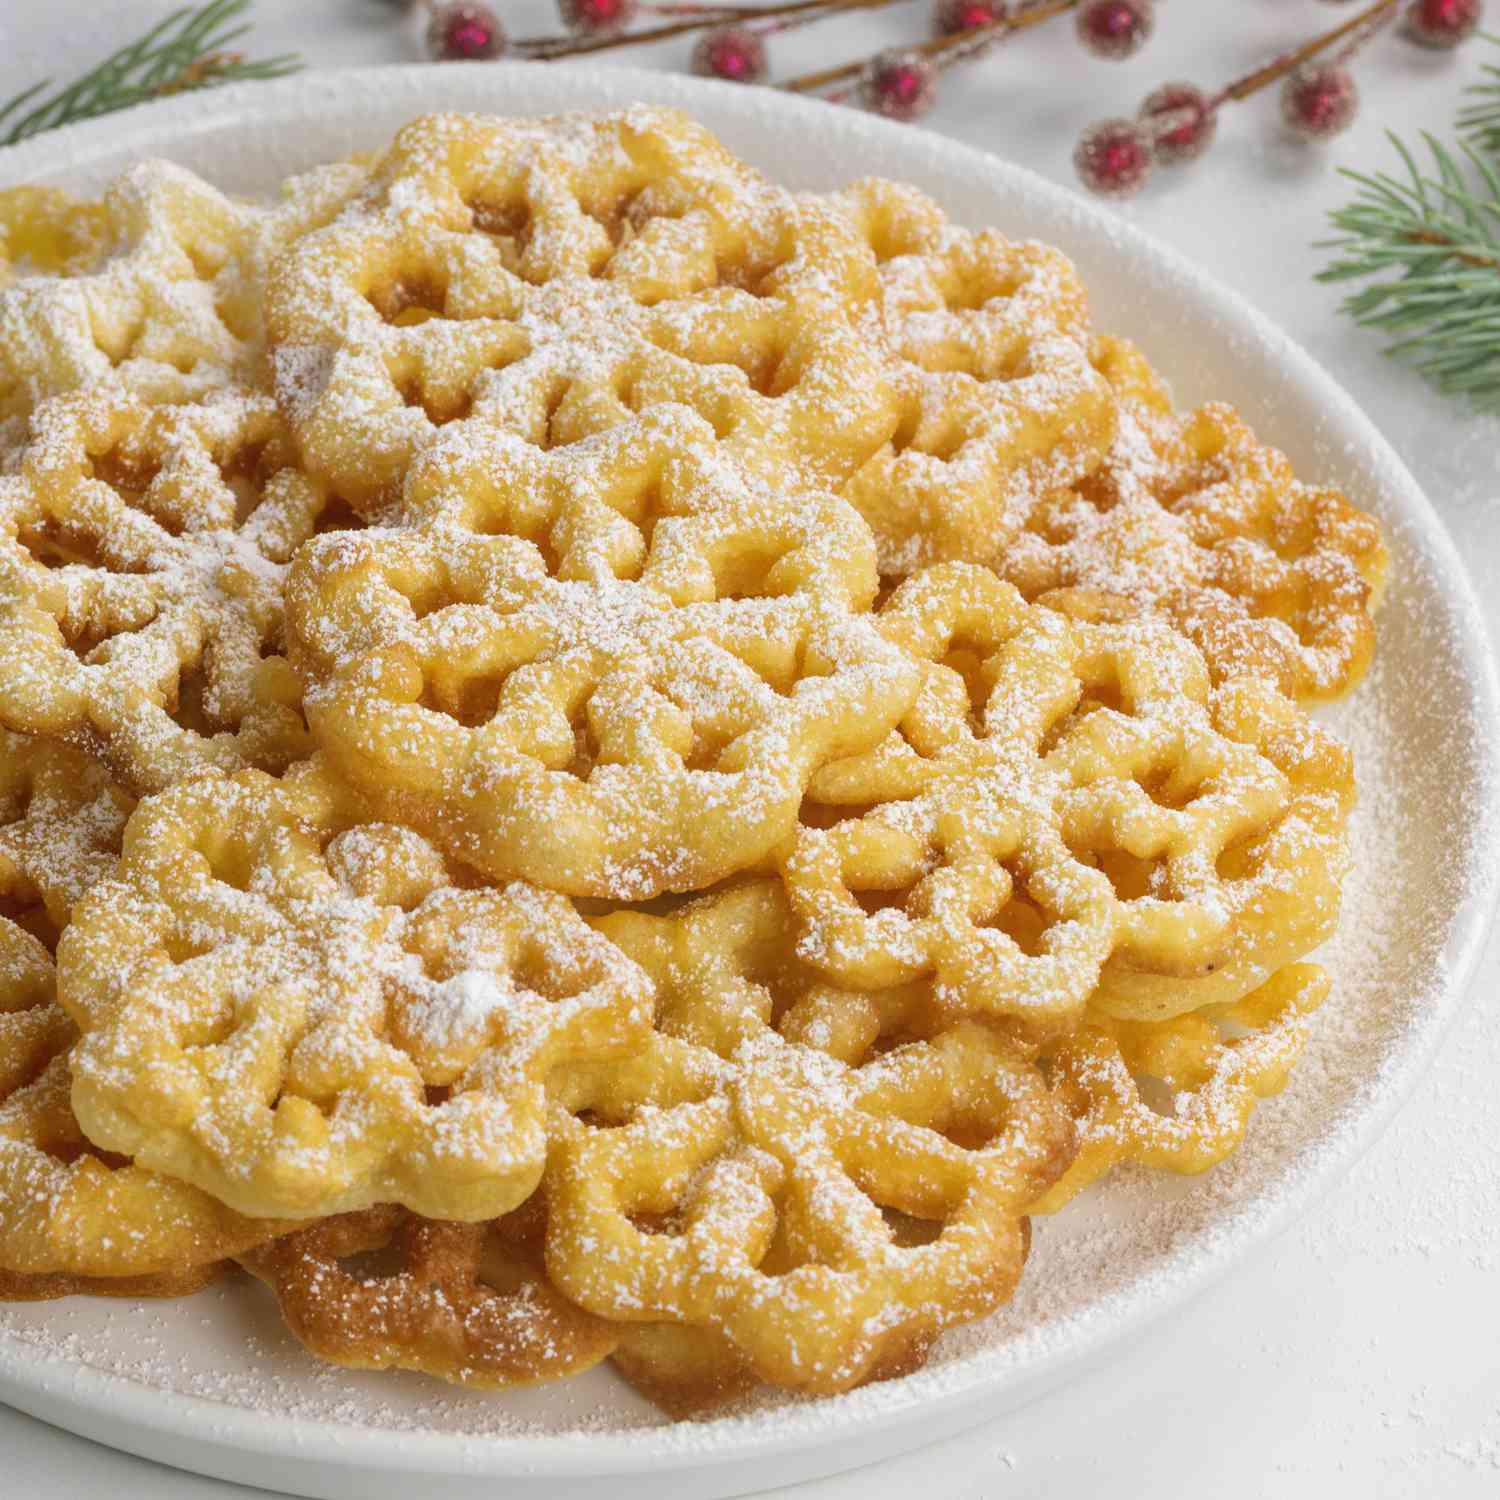 a close up view of a plate full of golden brown rosettes dusted with confectioners sugar